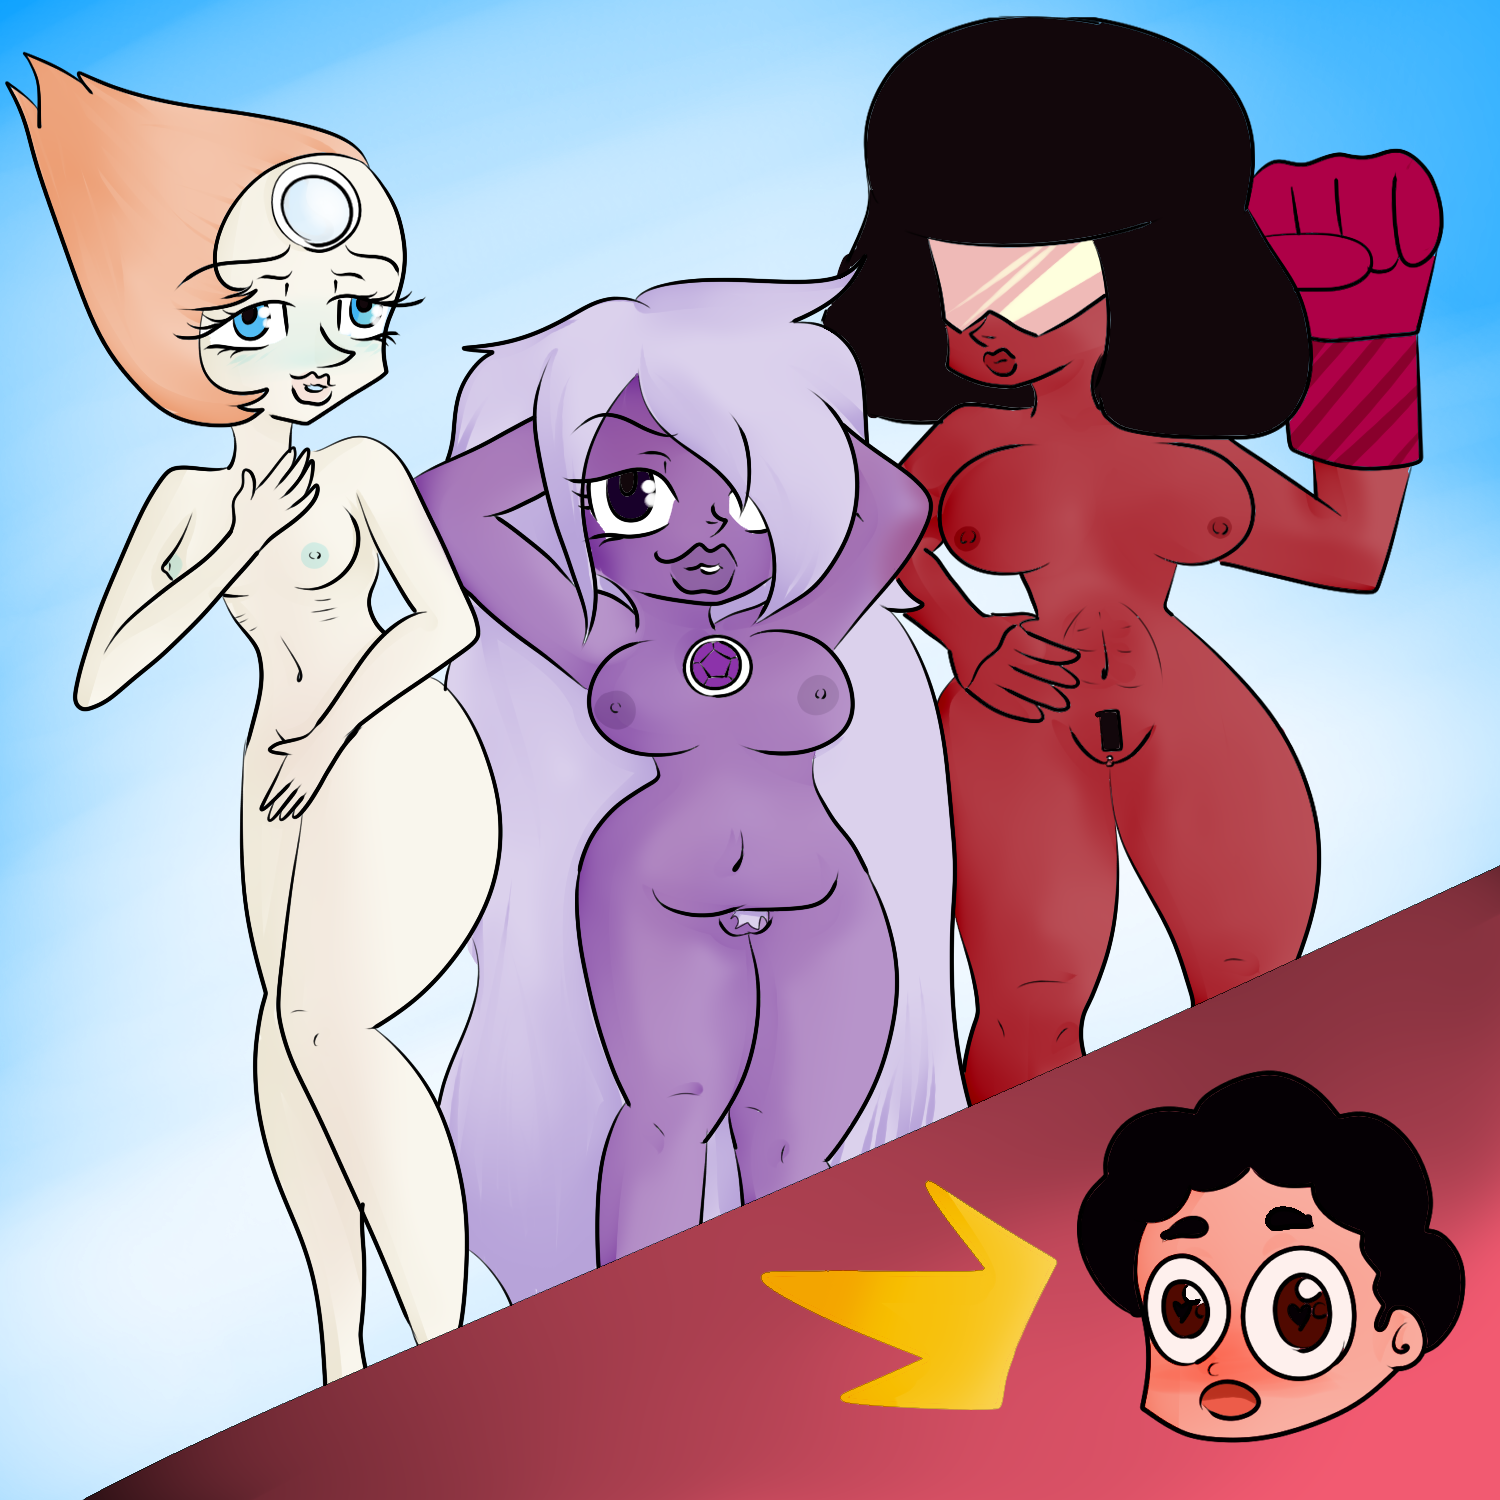 Steven universe nudes - 🧡 Steven Universe Hentai - Gems Need Love To - Pho...